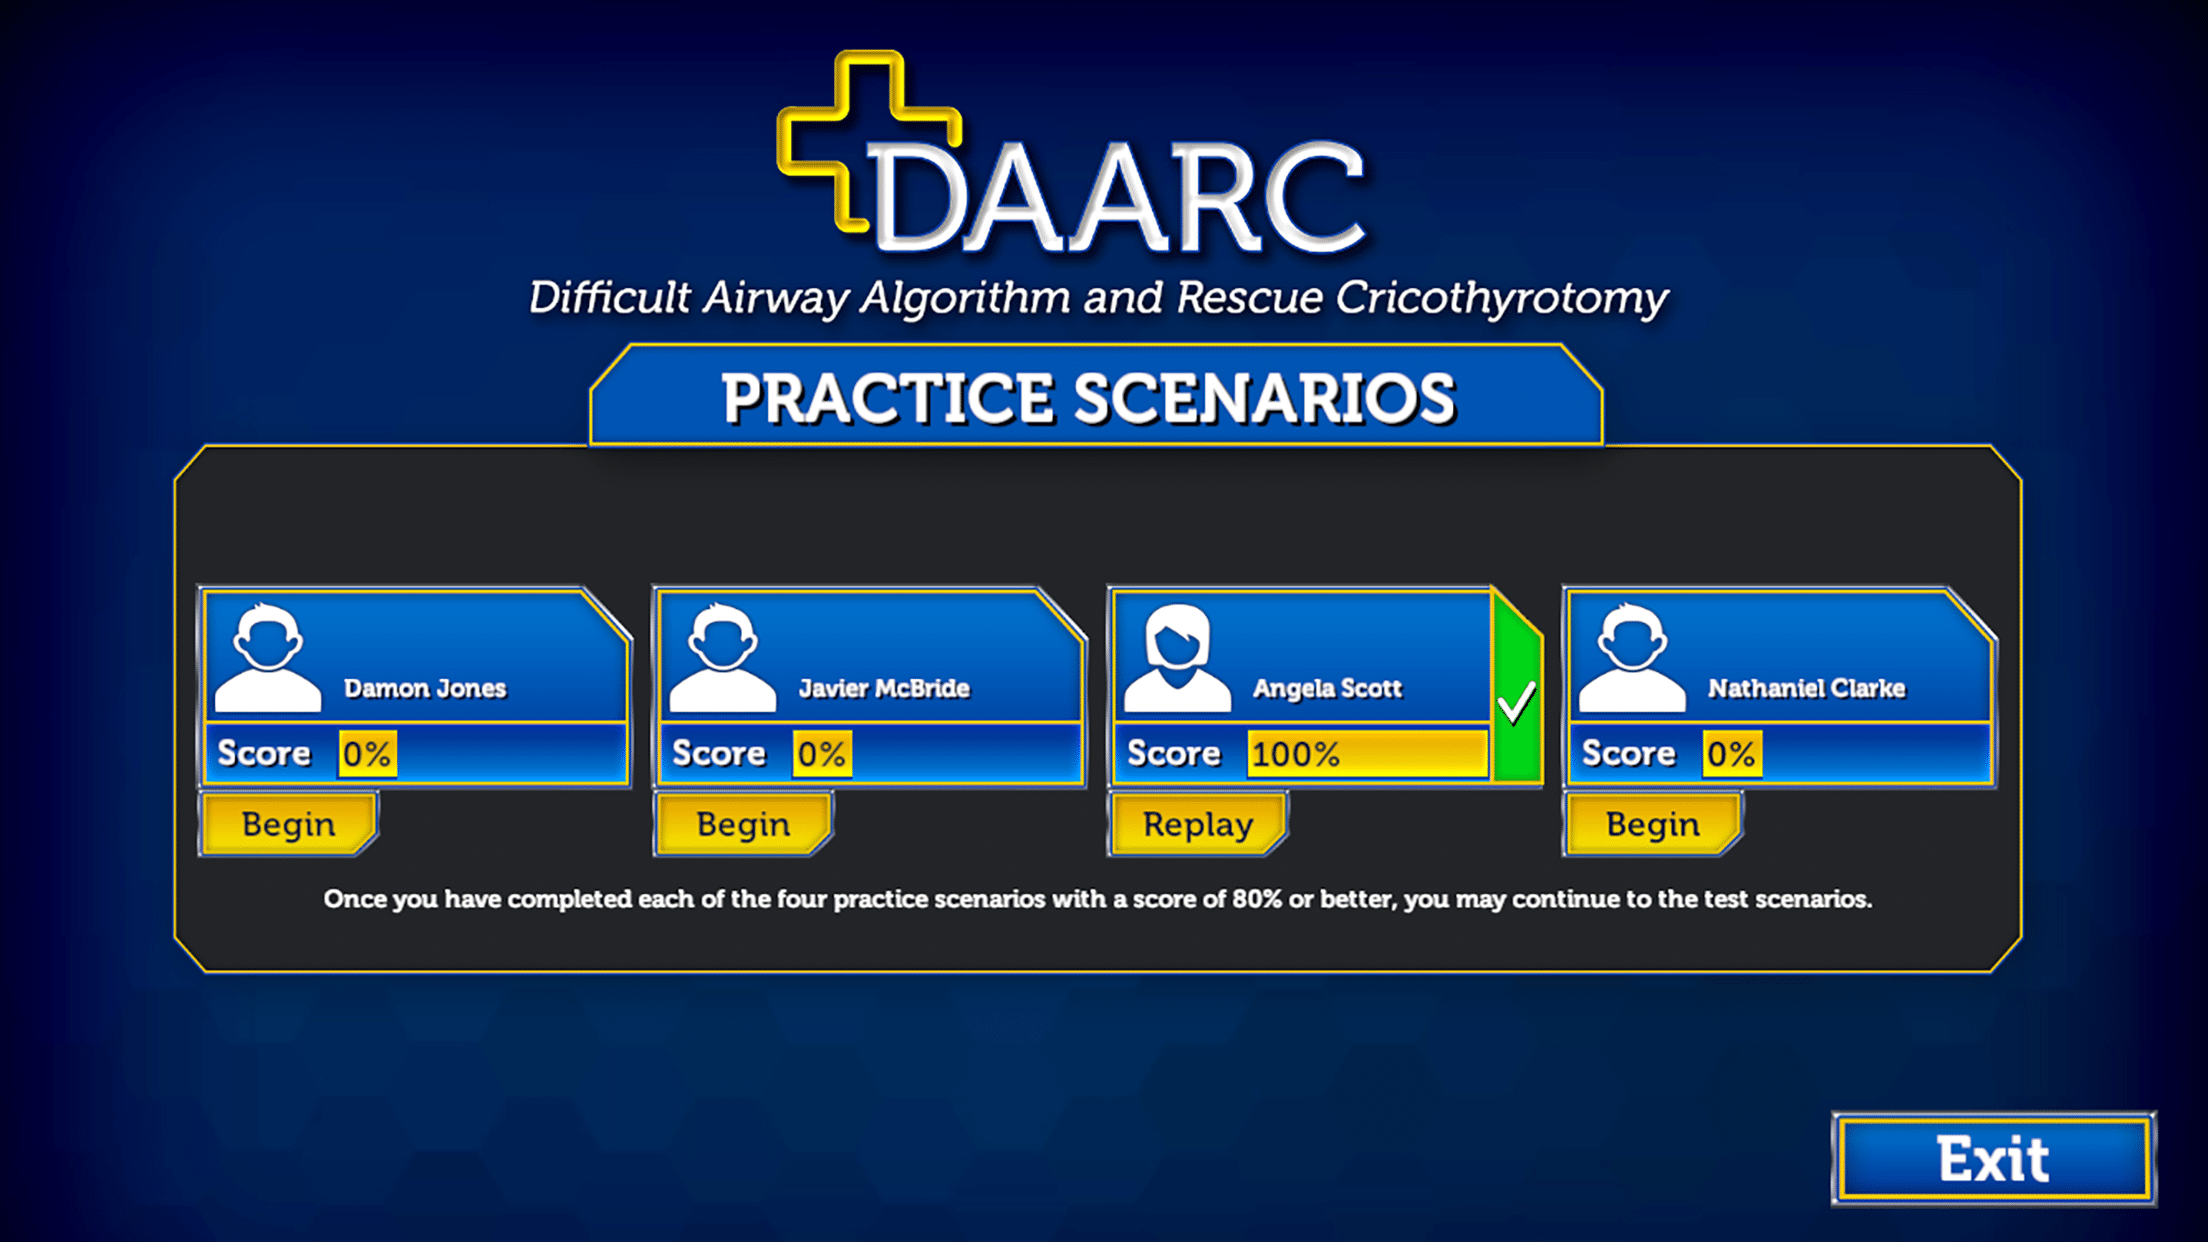 Difficult Airway Algorithm and Rescue Cricothyrotomy (DAARC) - Veterans Health Administration Employee Education System-eLearning